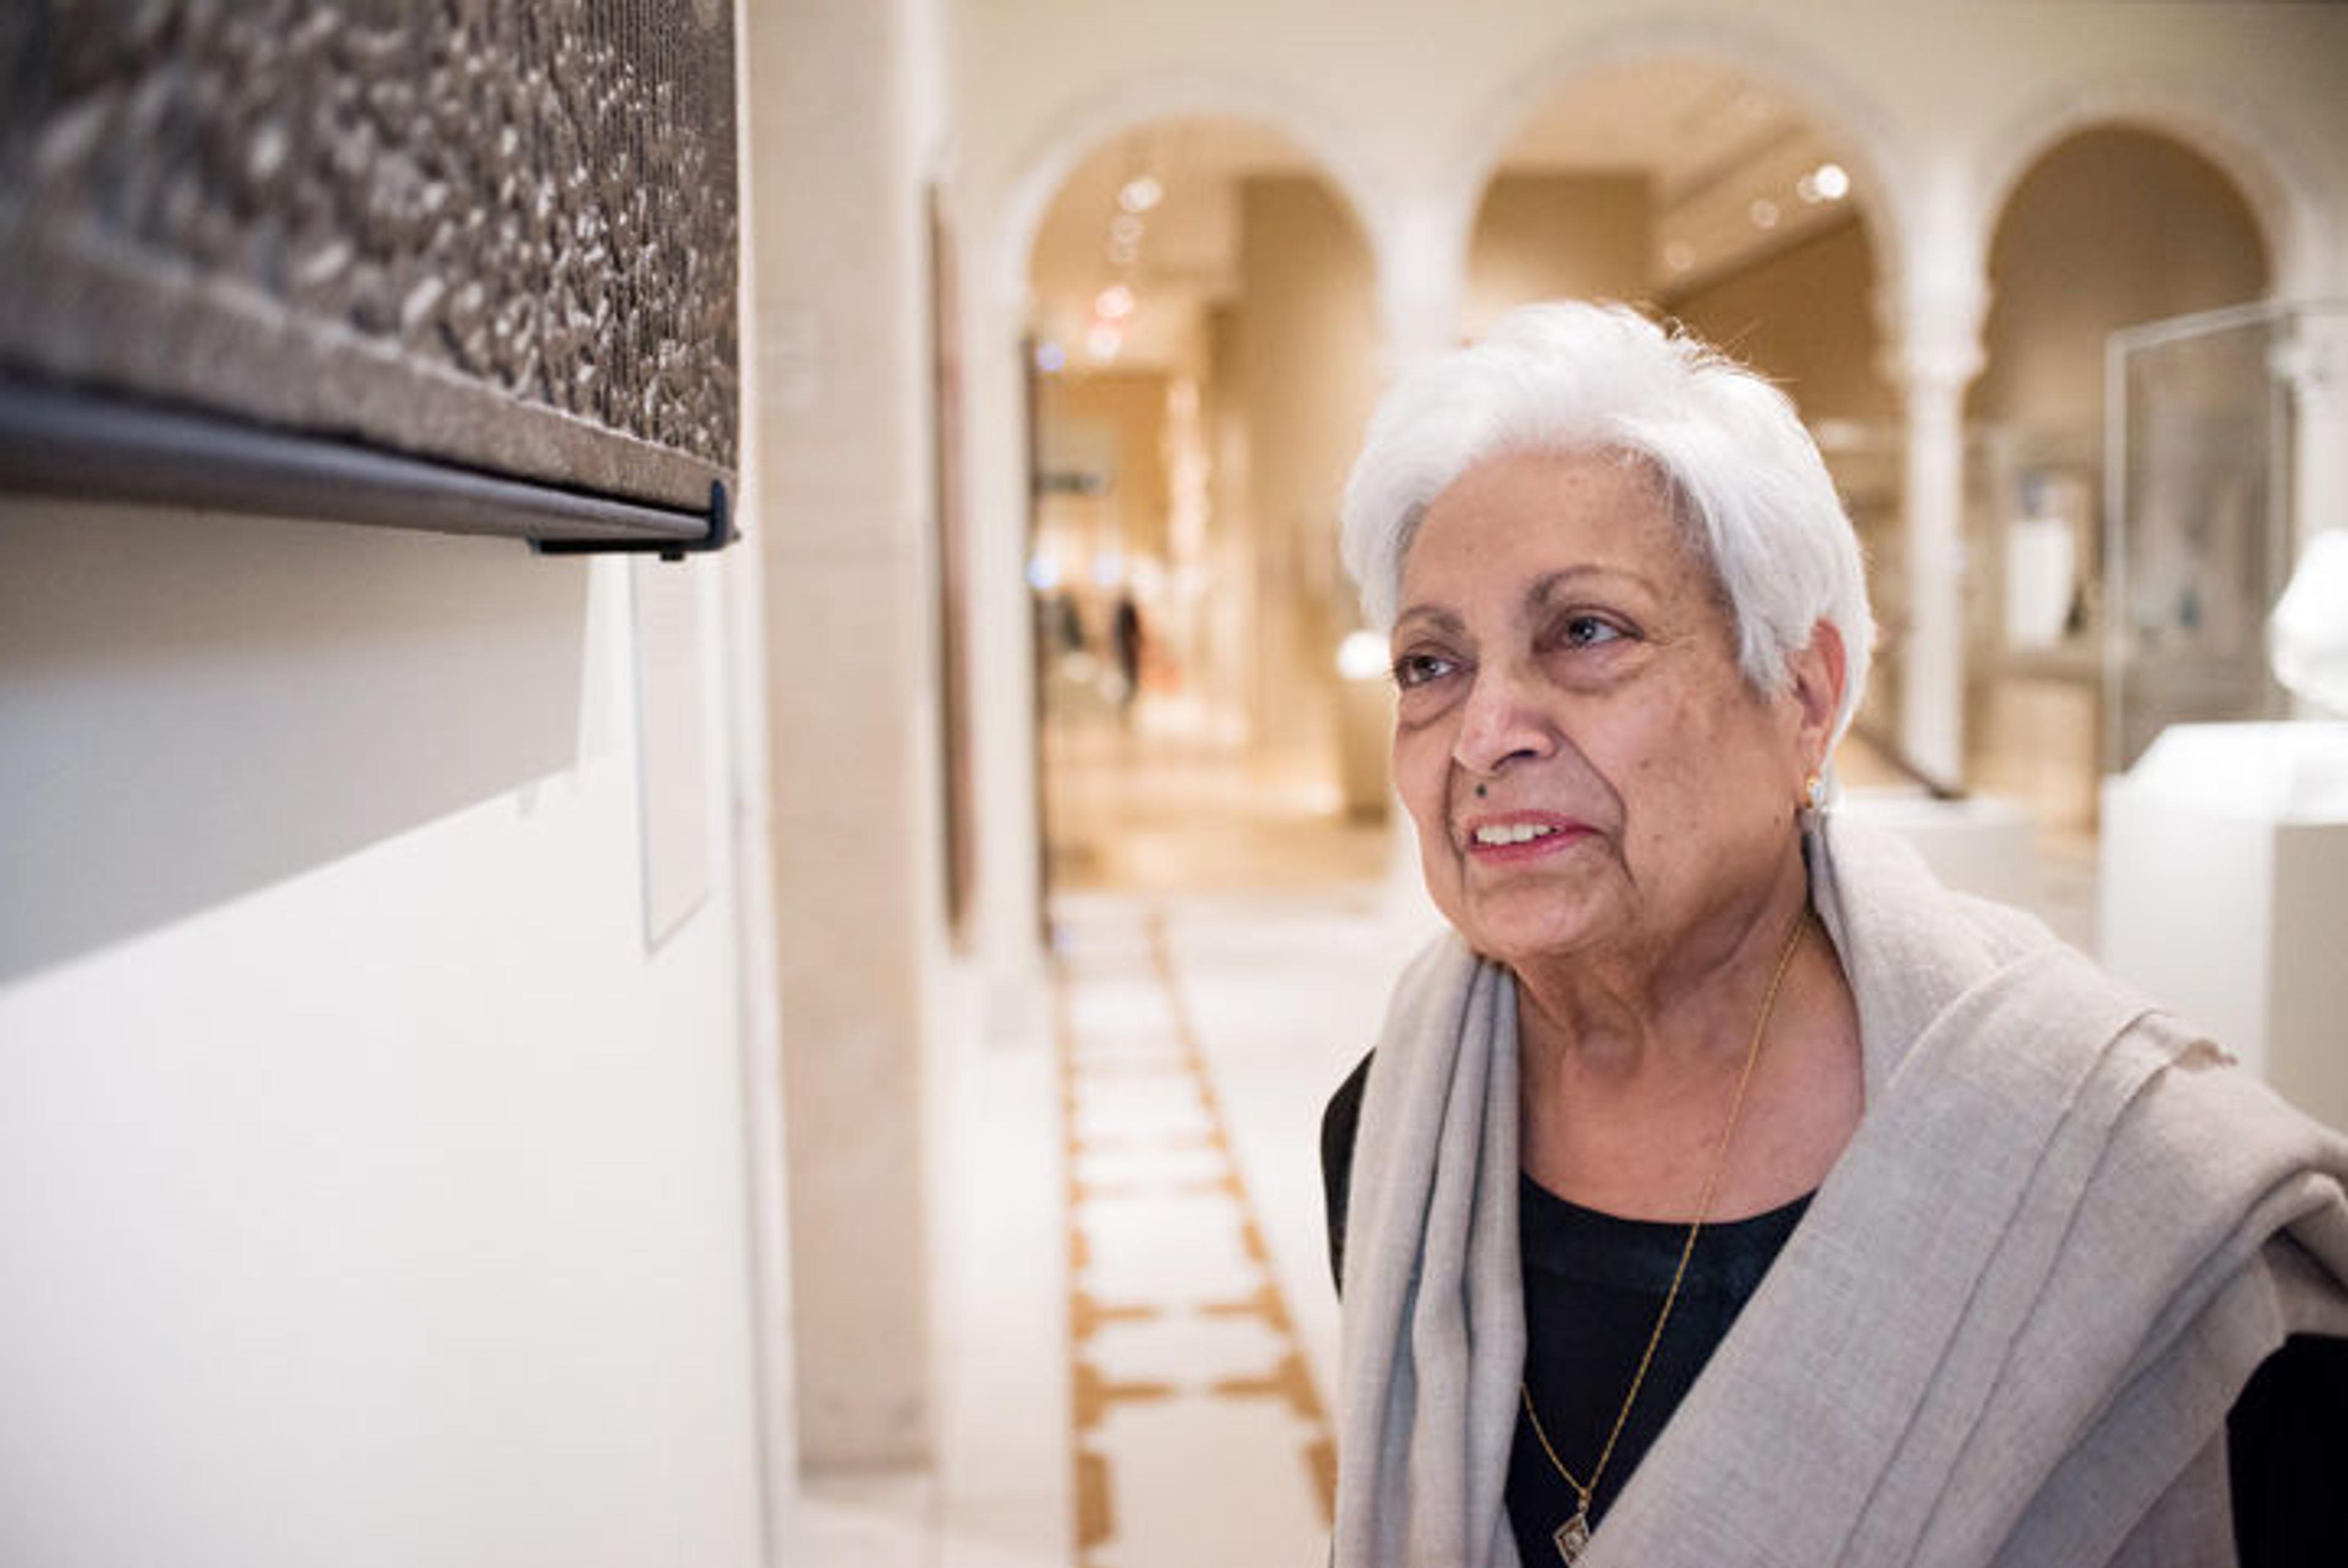 Zarina Hashmi comments on a work of art in The Met's Islamic Arts galleries